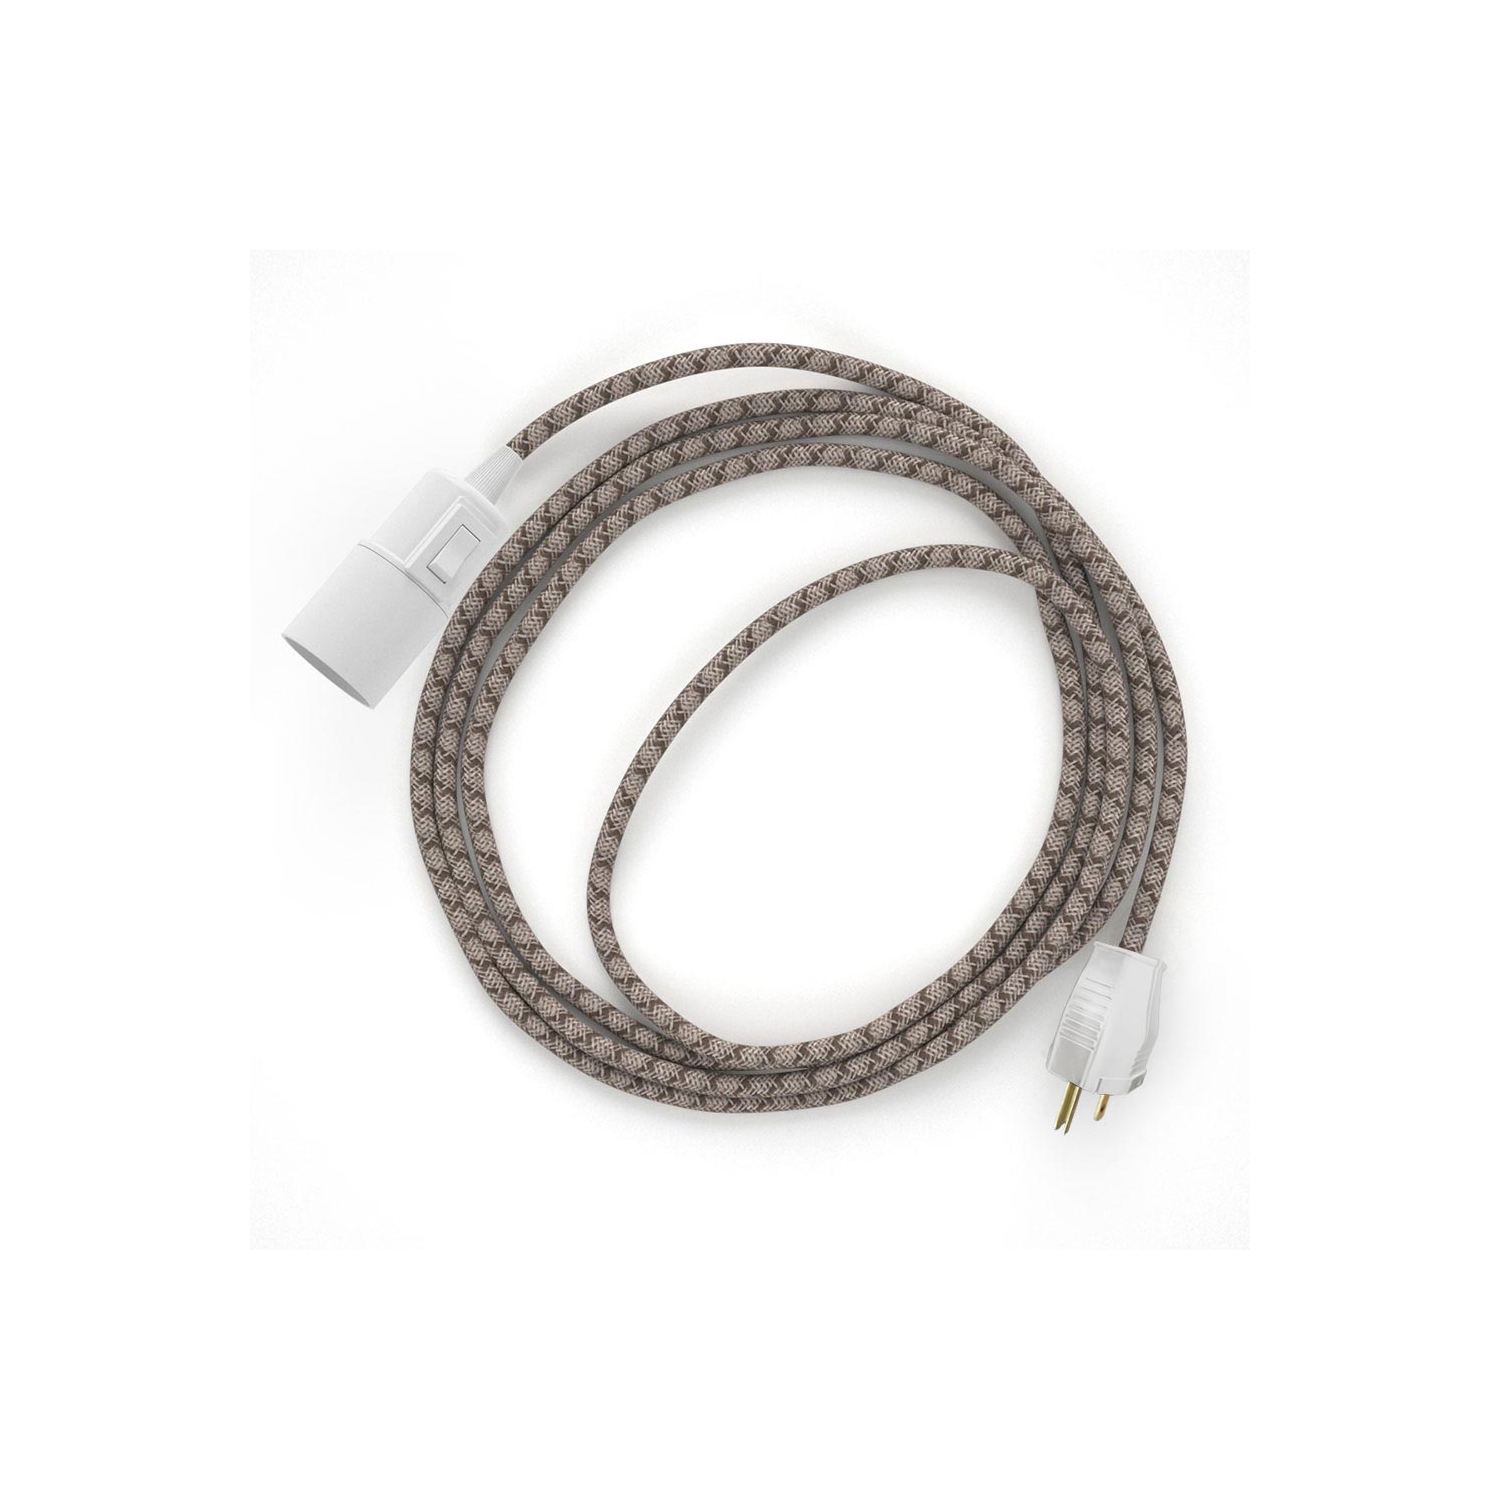 Plug-in Pendant with switch on socket | RD63 Natural & Brown Linen CrissCross